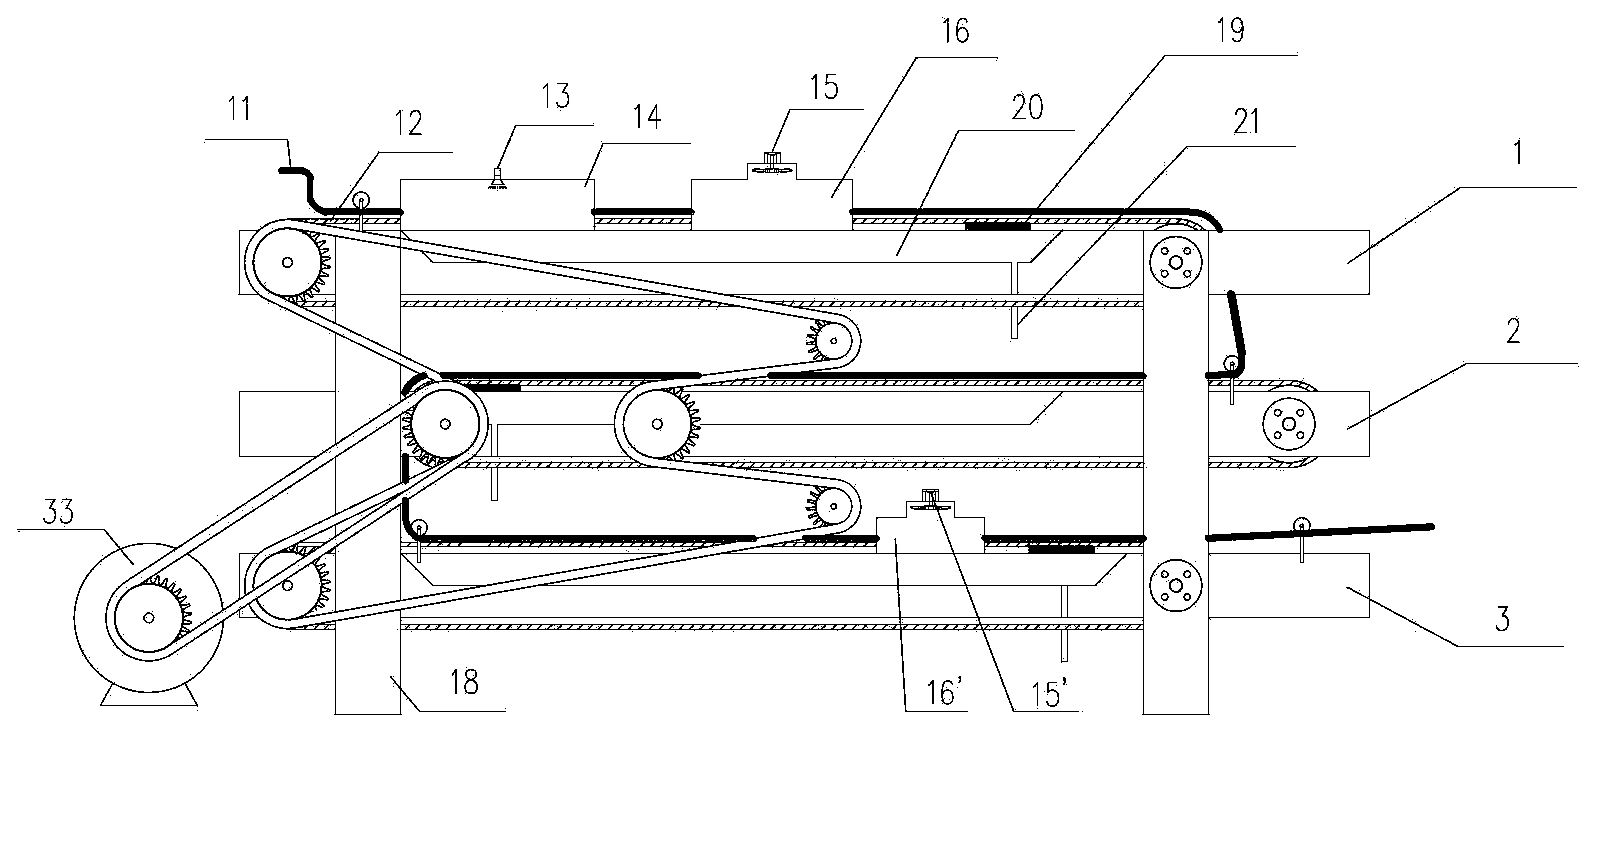 Extruded plastic cooling device